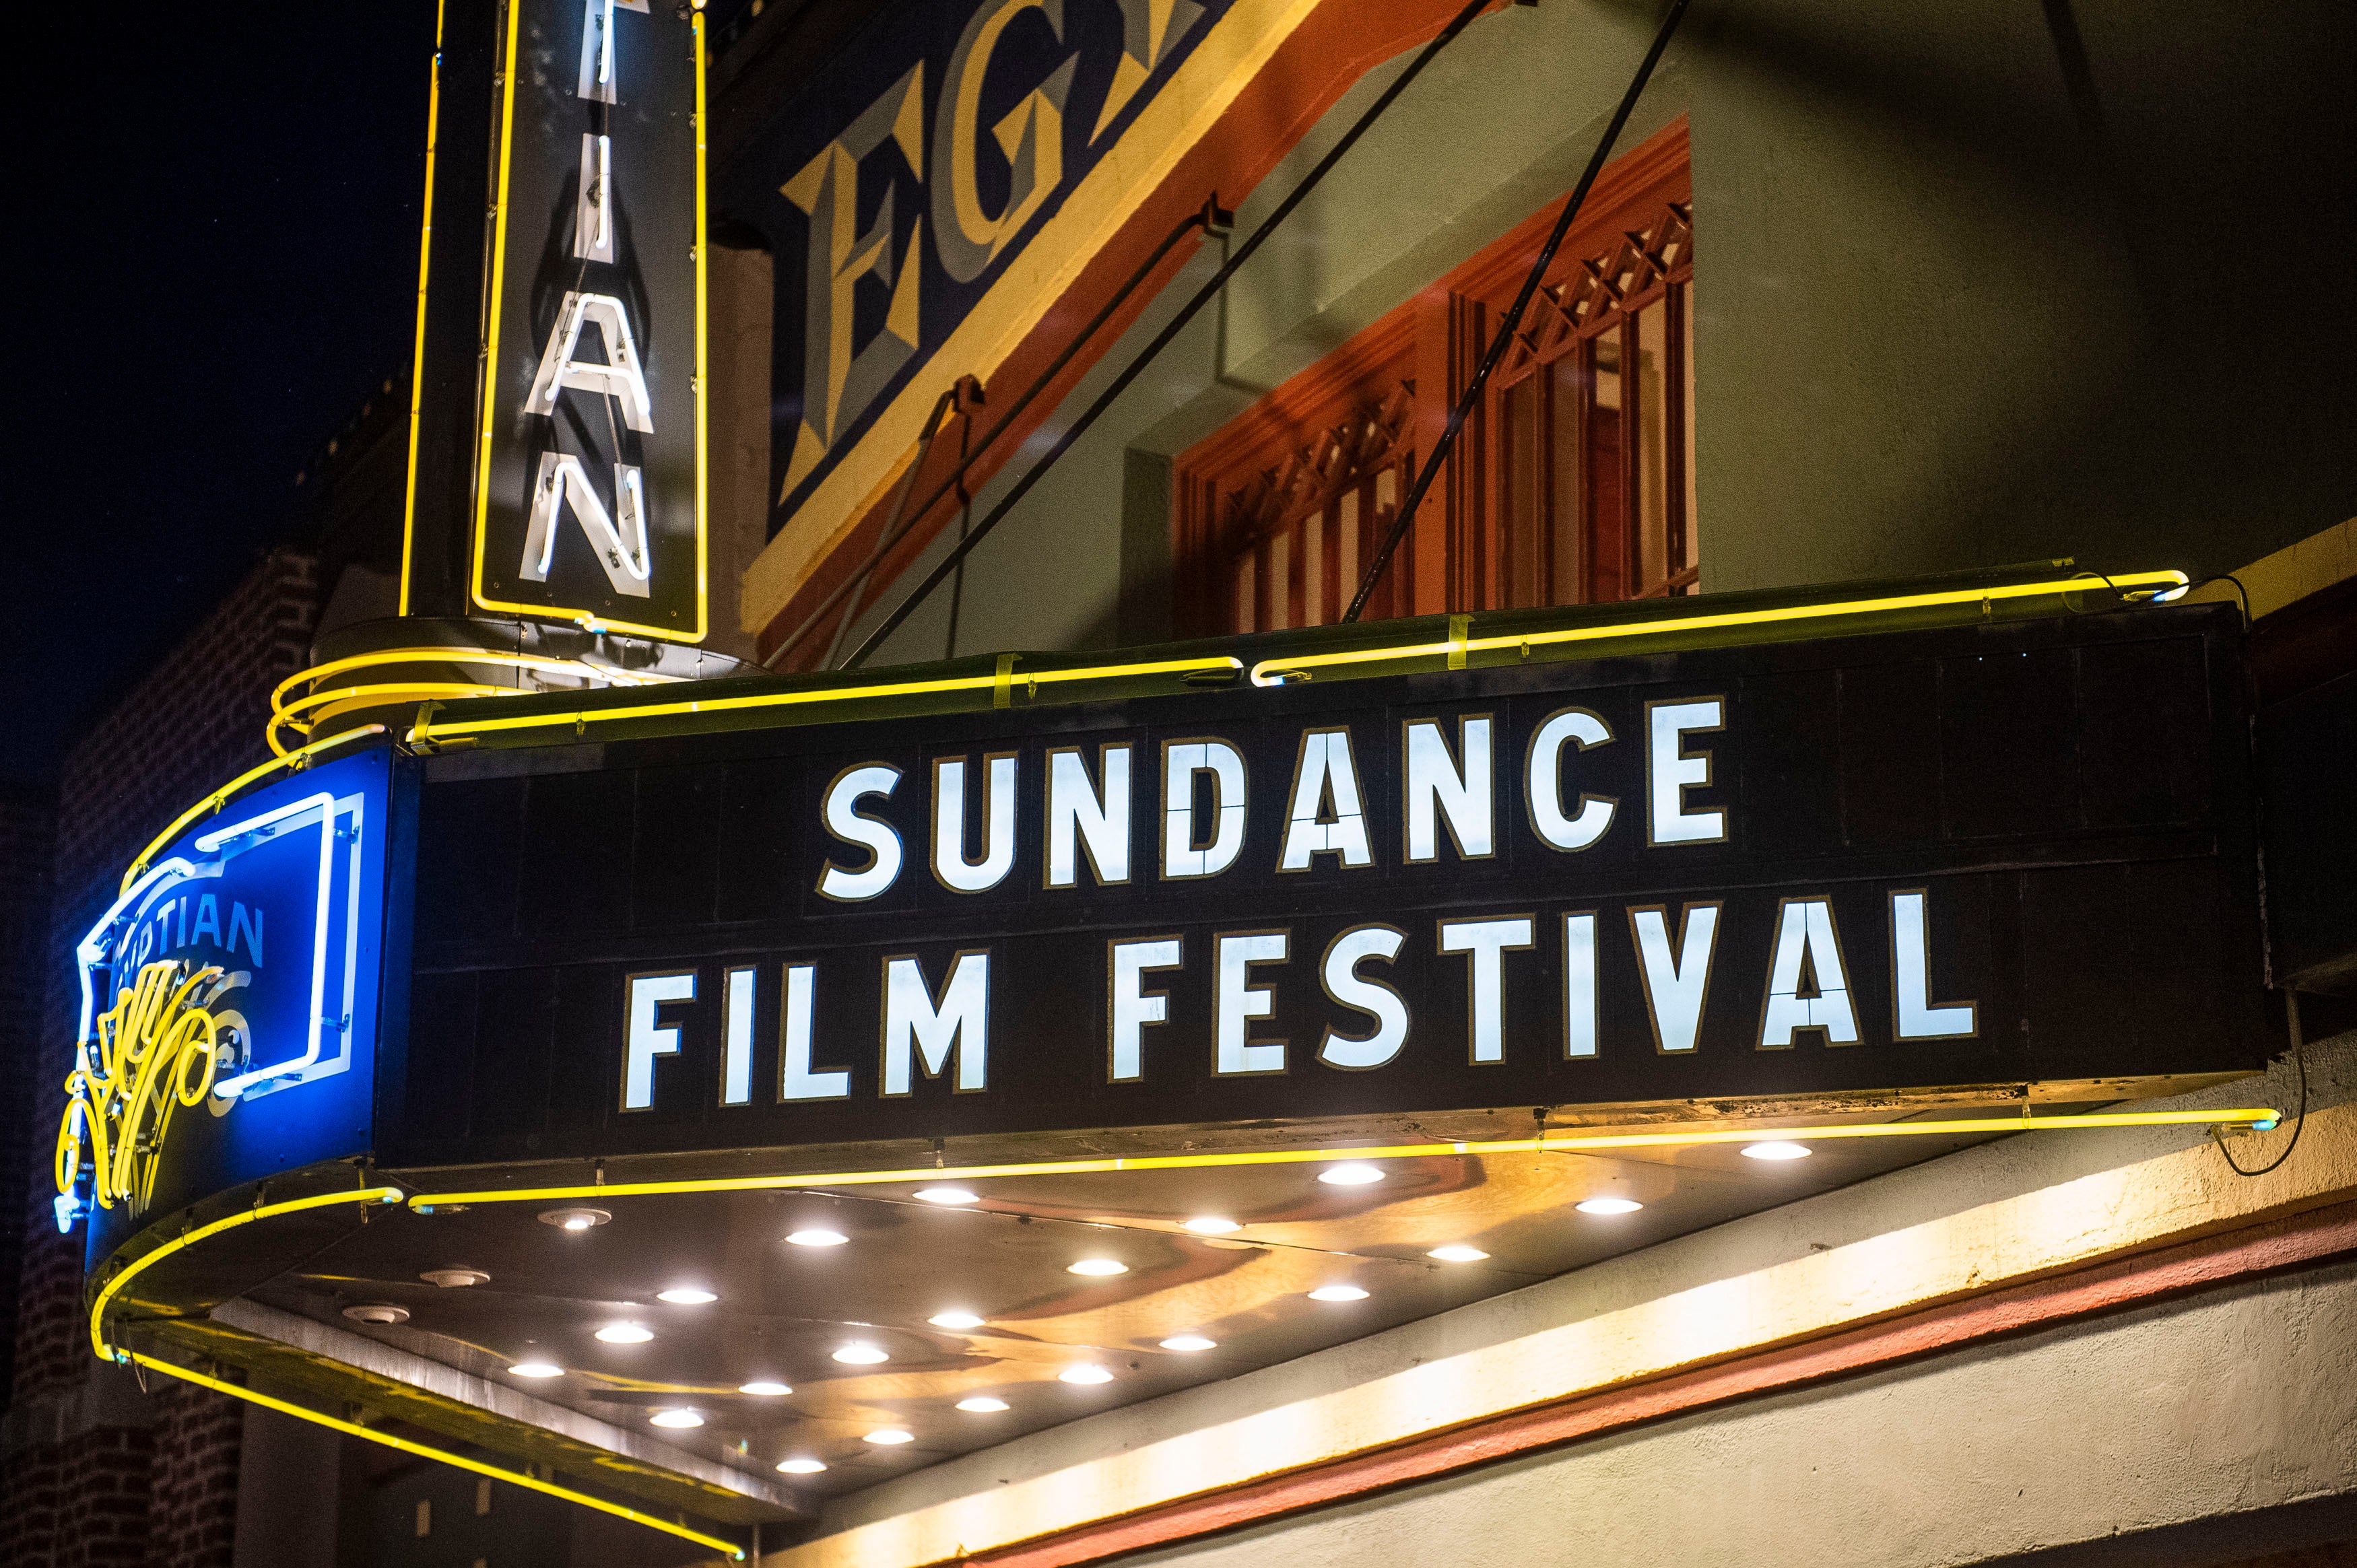 At 40, the Sundance Film Festival celebrates its past and looks to the